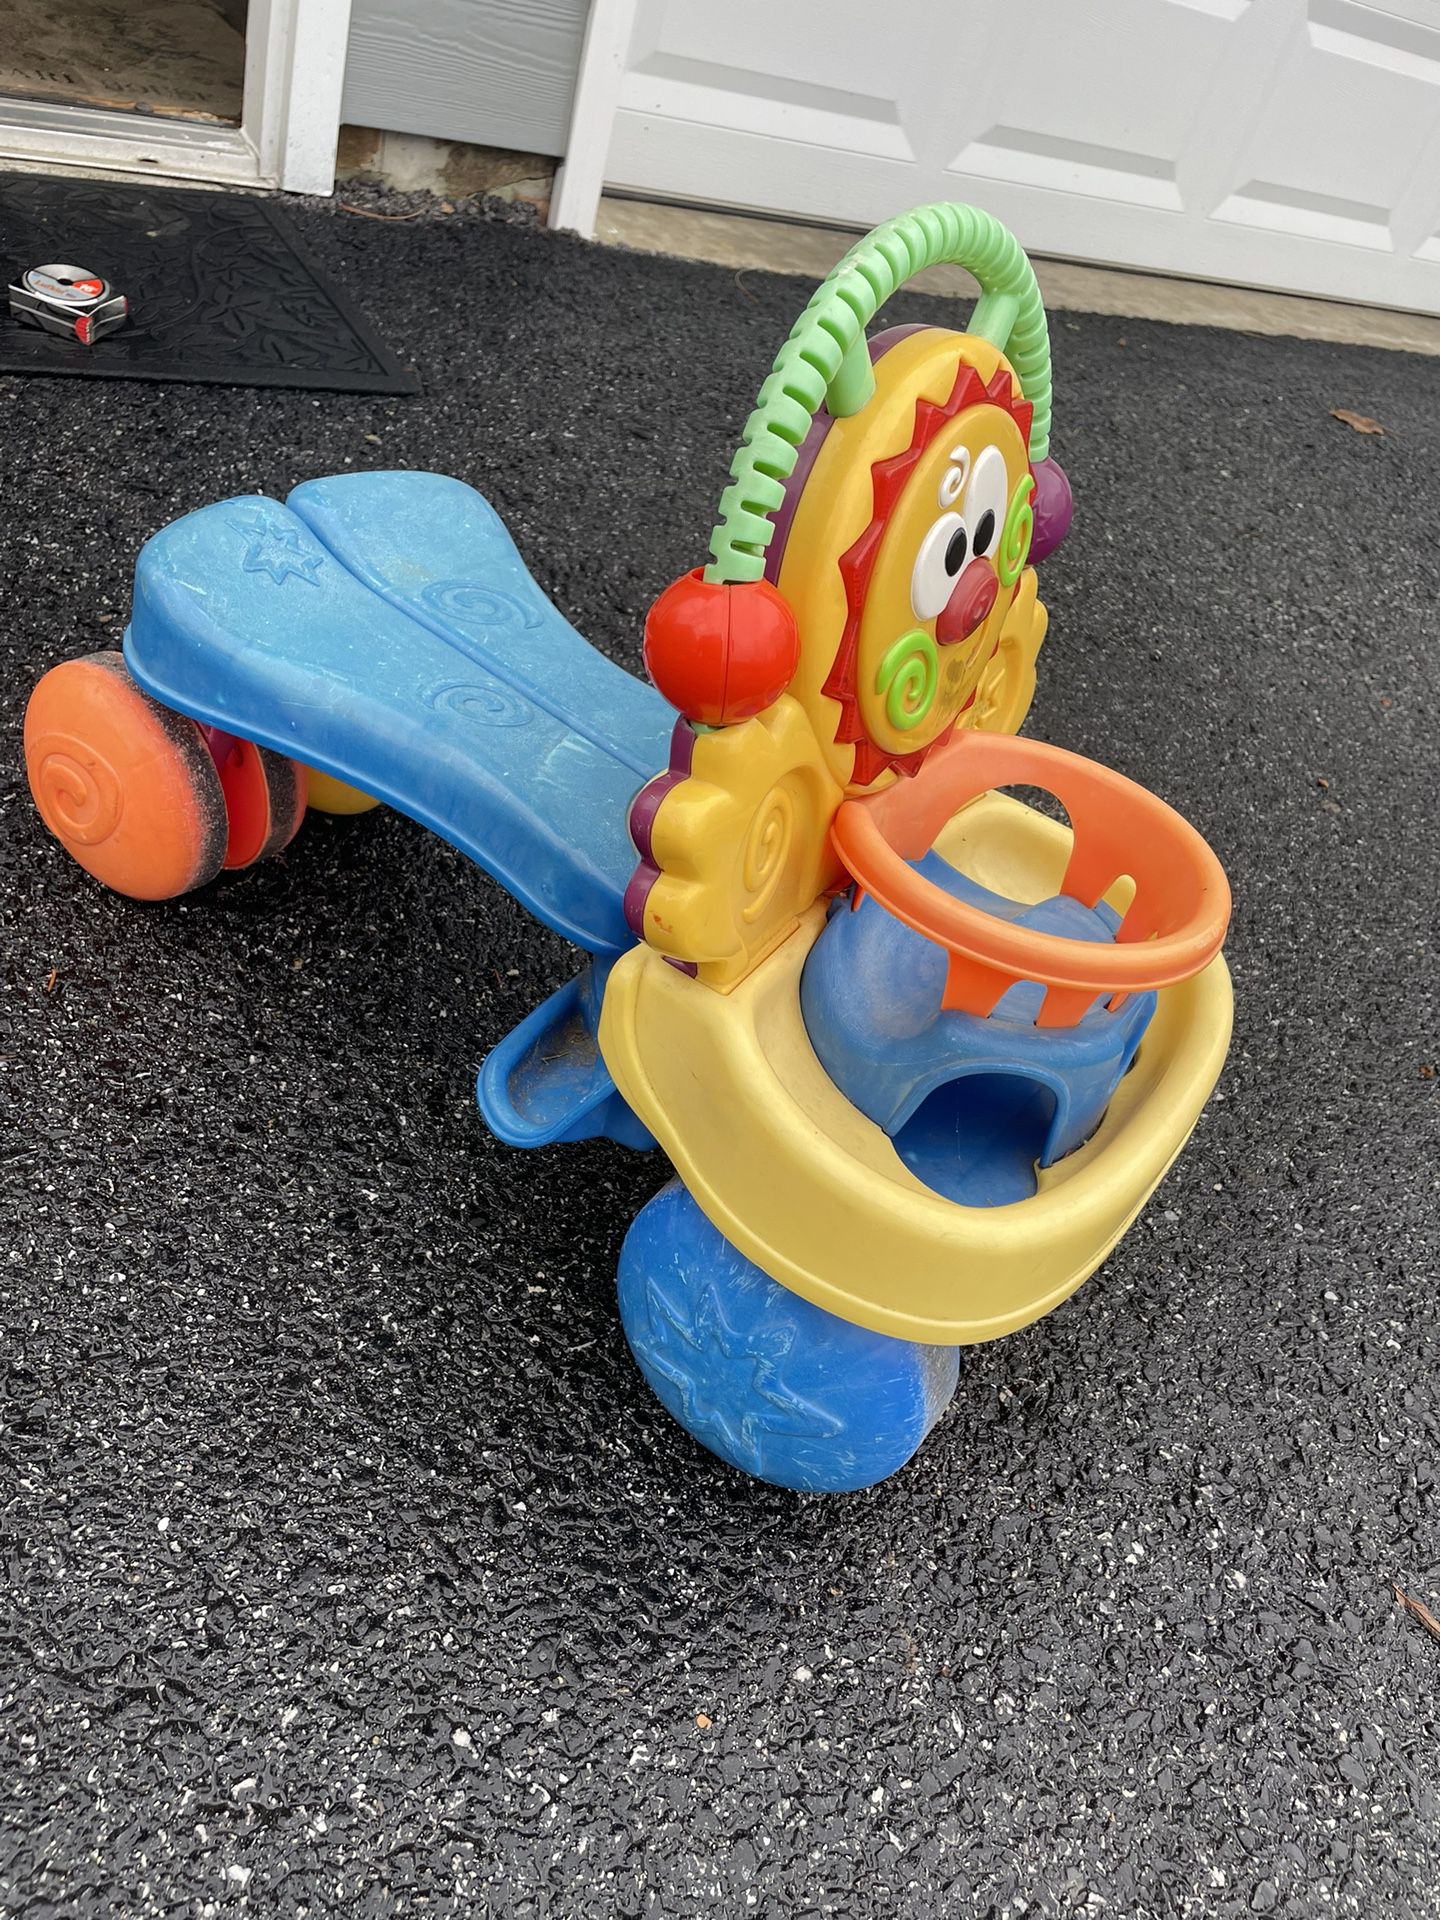 Fisher Price Ride On Toy